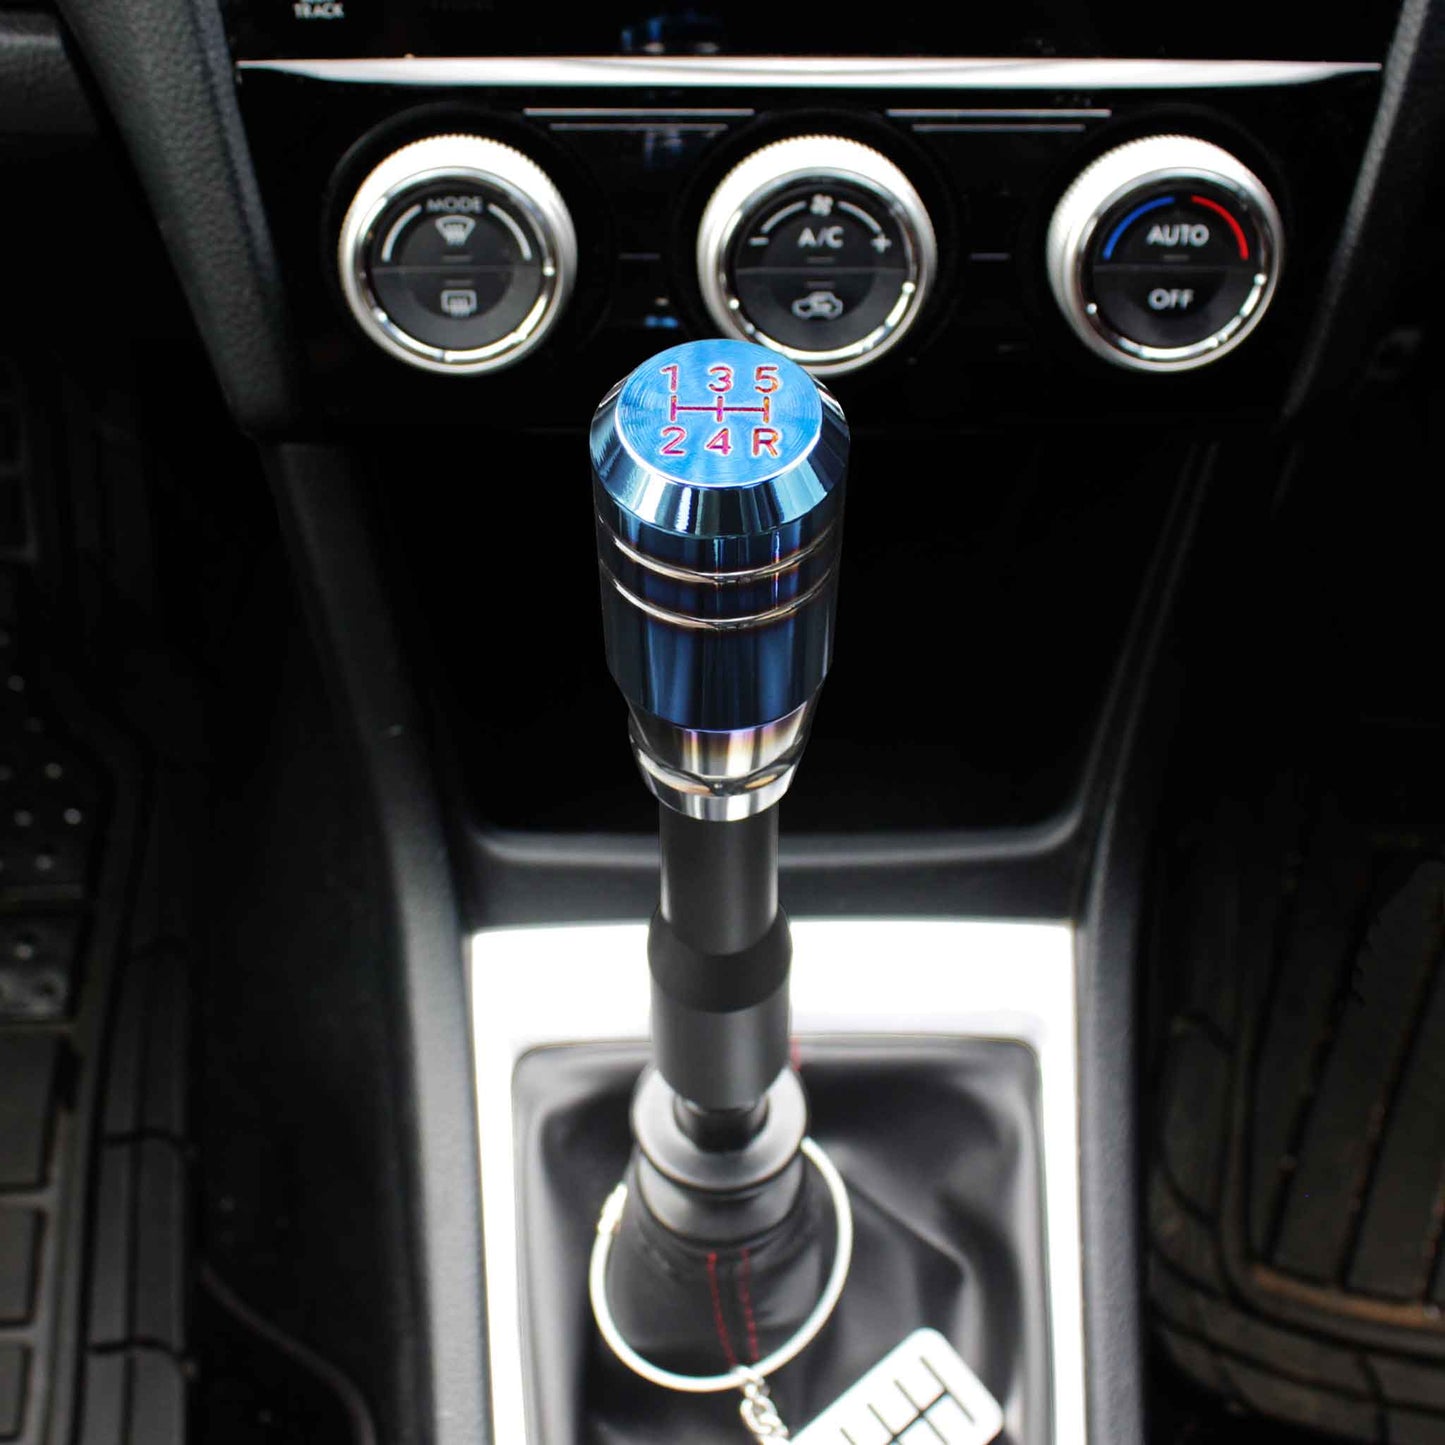 A burnt blue shift knob is installed on a manual WRX with an extension between the knob and the shift boot, and a six-speed dog-tag is hanging around the shift boot